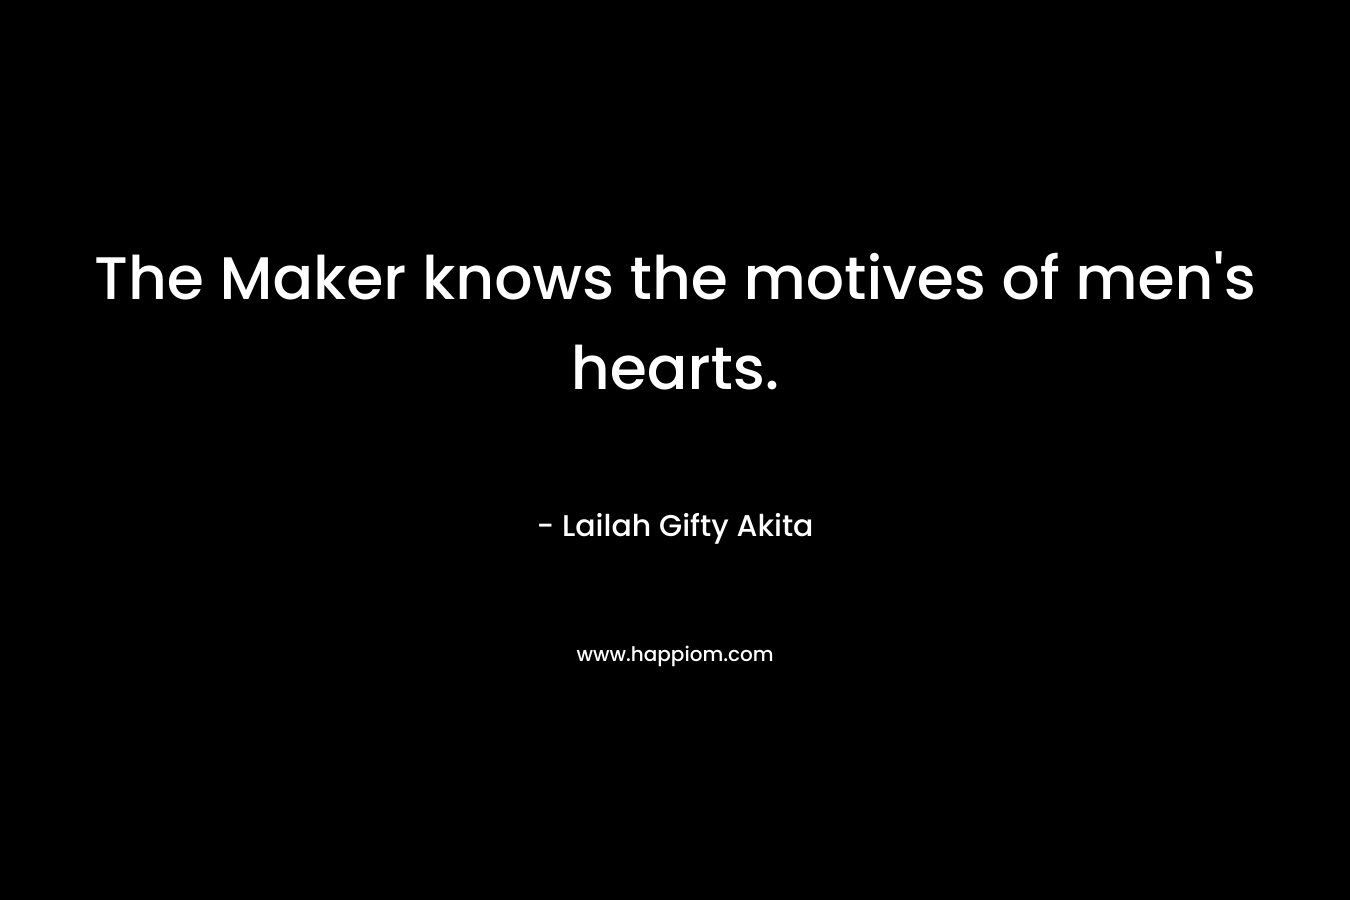 The Maker knows the motives of men’s hearts. – Lailah Gifty Akita